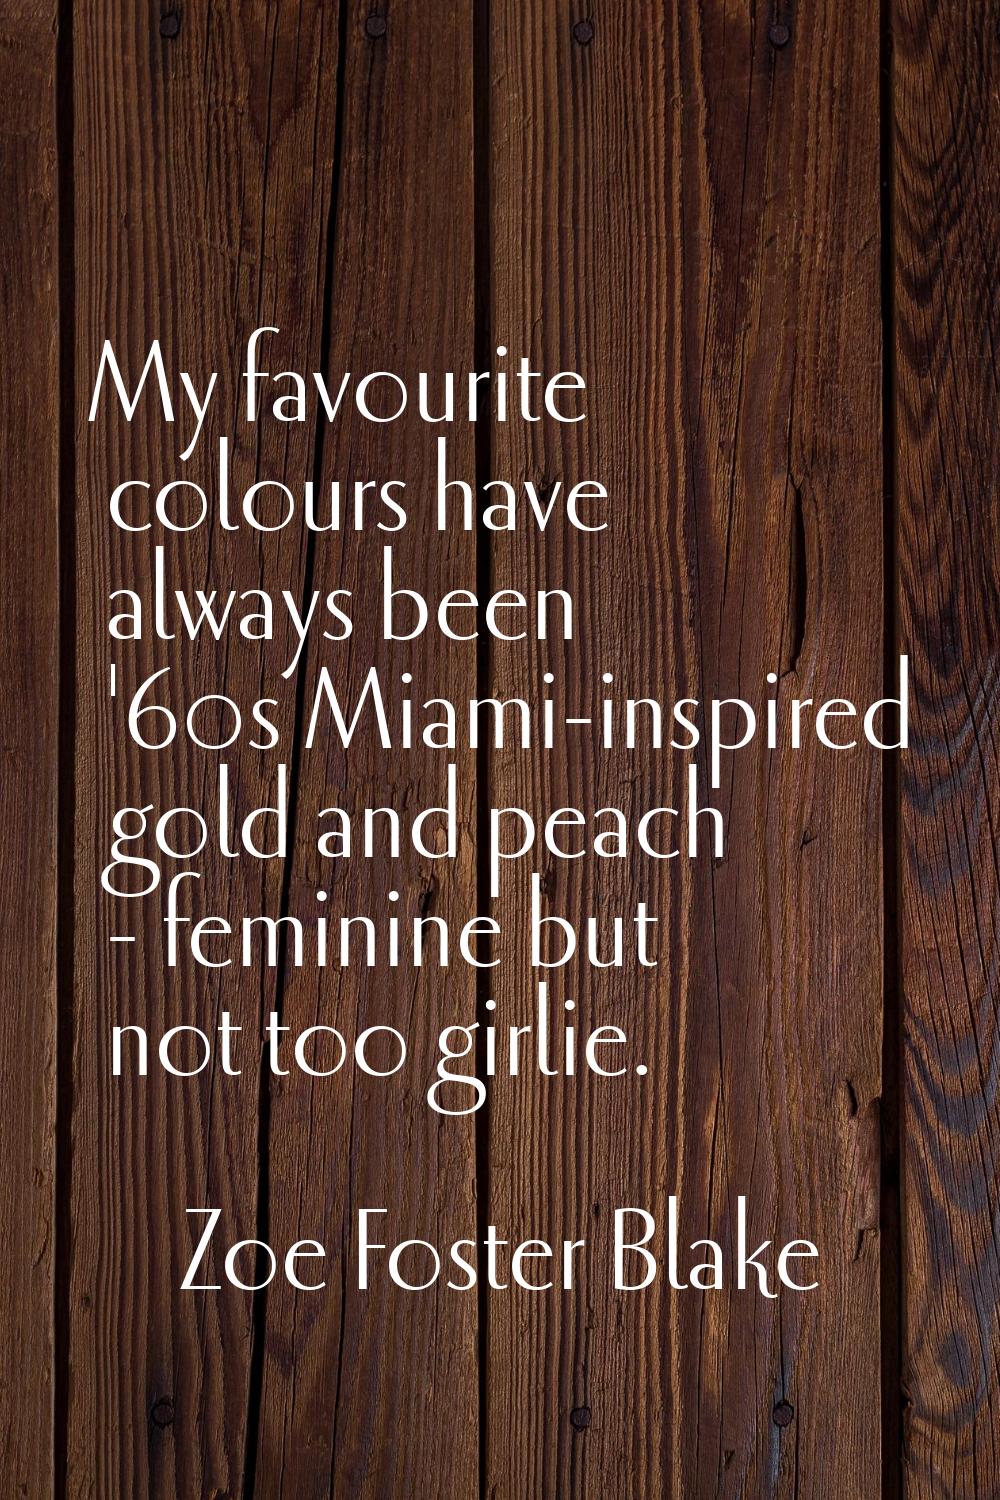 My favourite colours have always been '60s Miami-inspired gold and peach - feminine but not too gir